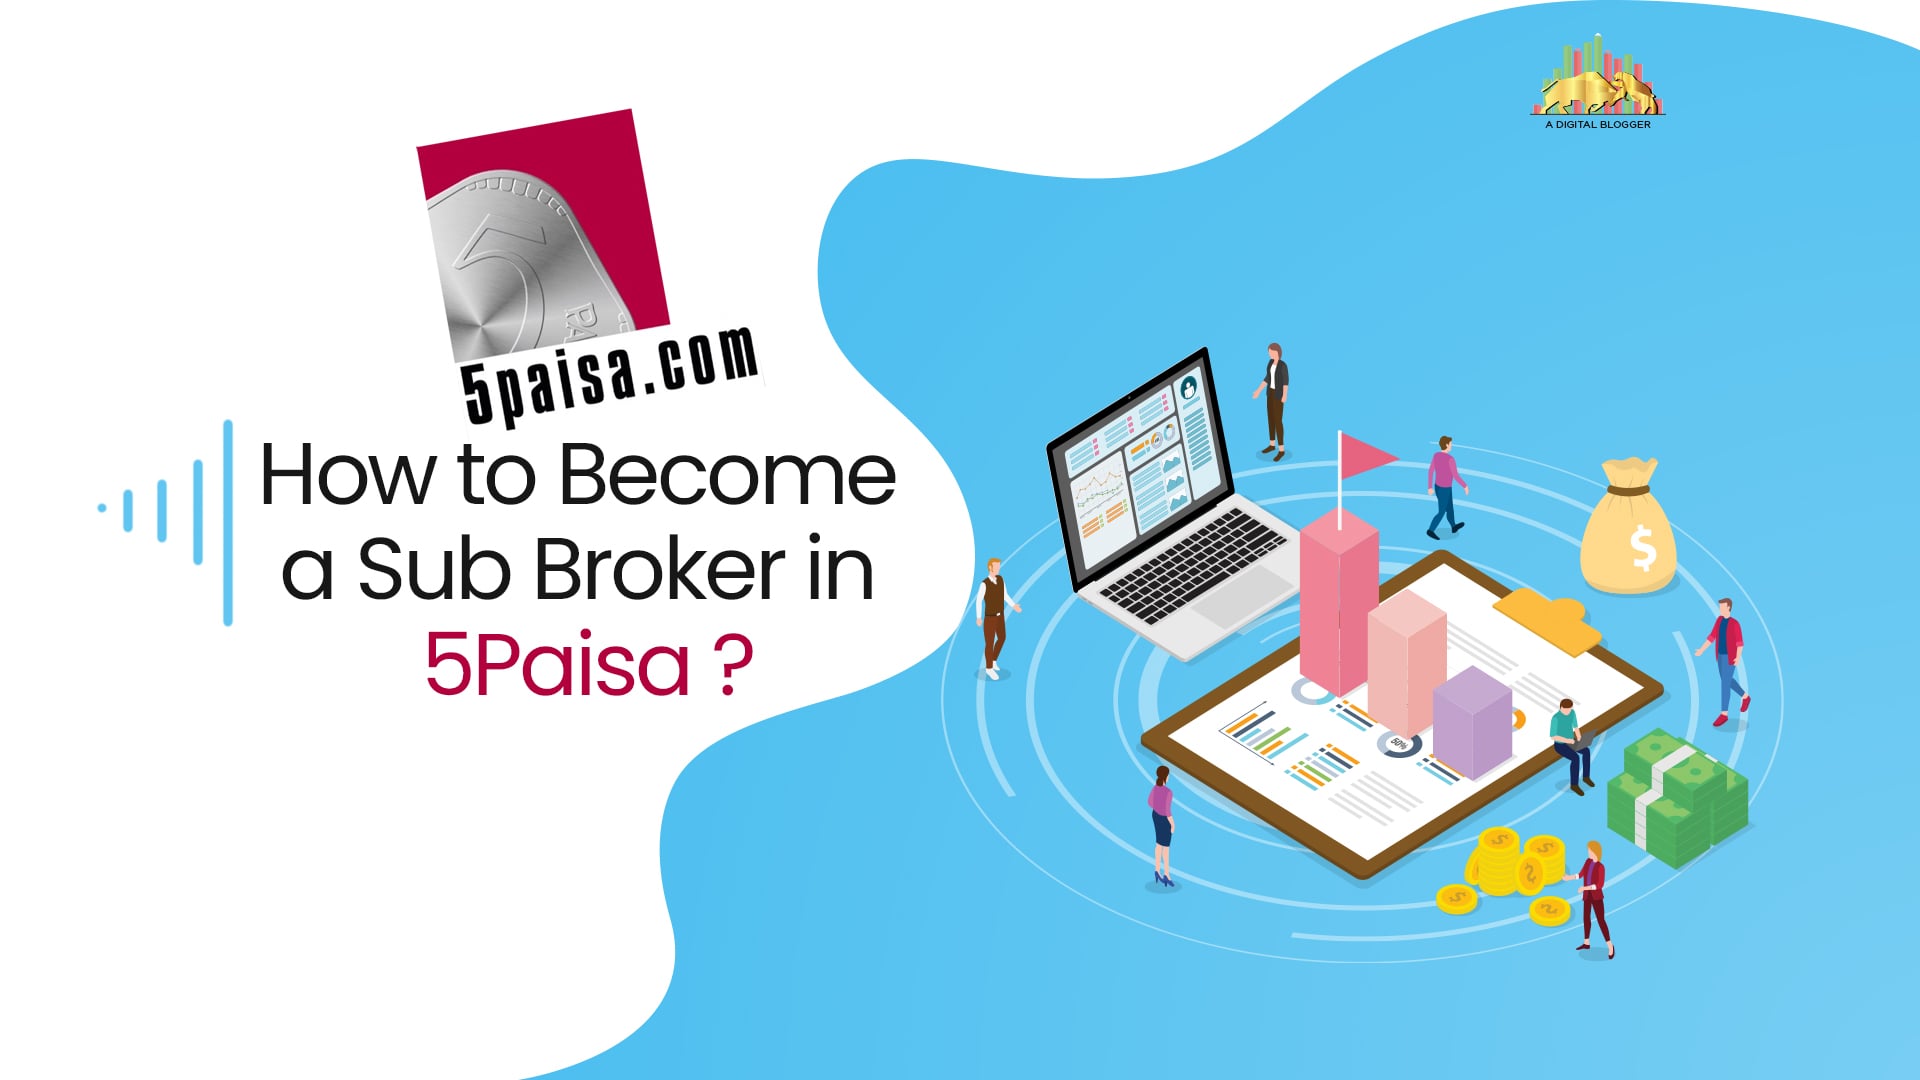 How to Become a Sub Broker in 5paisa?